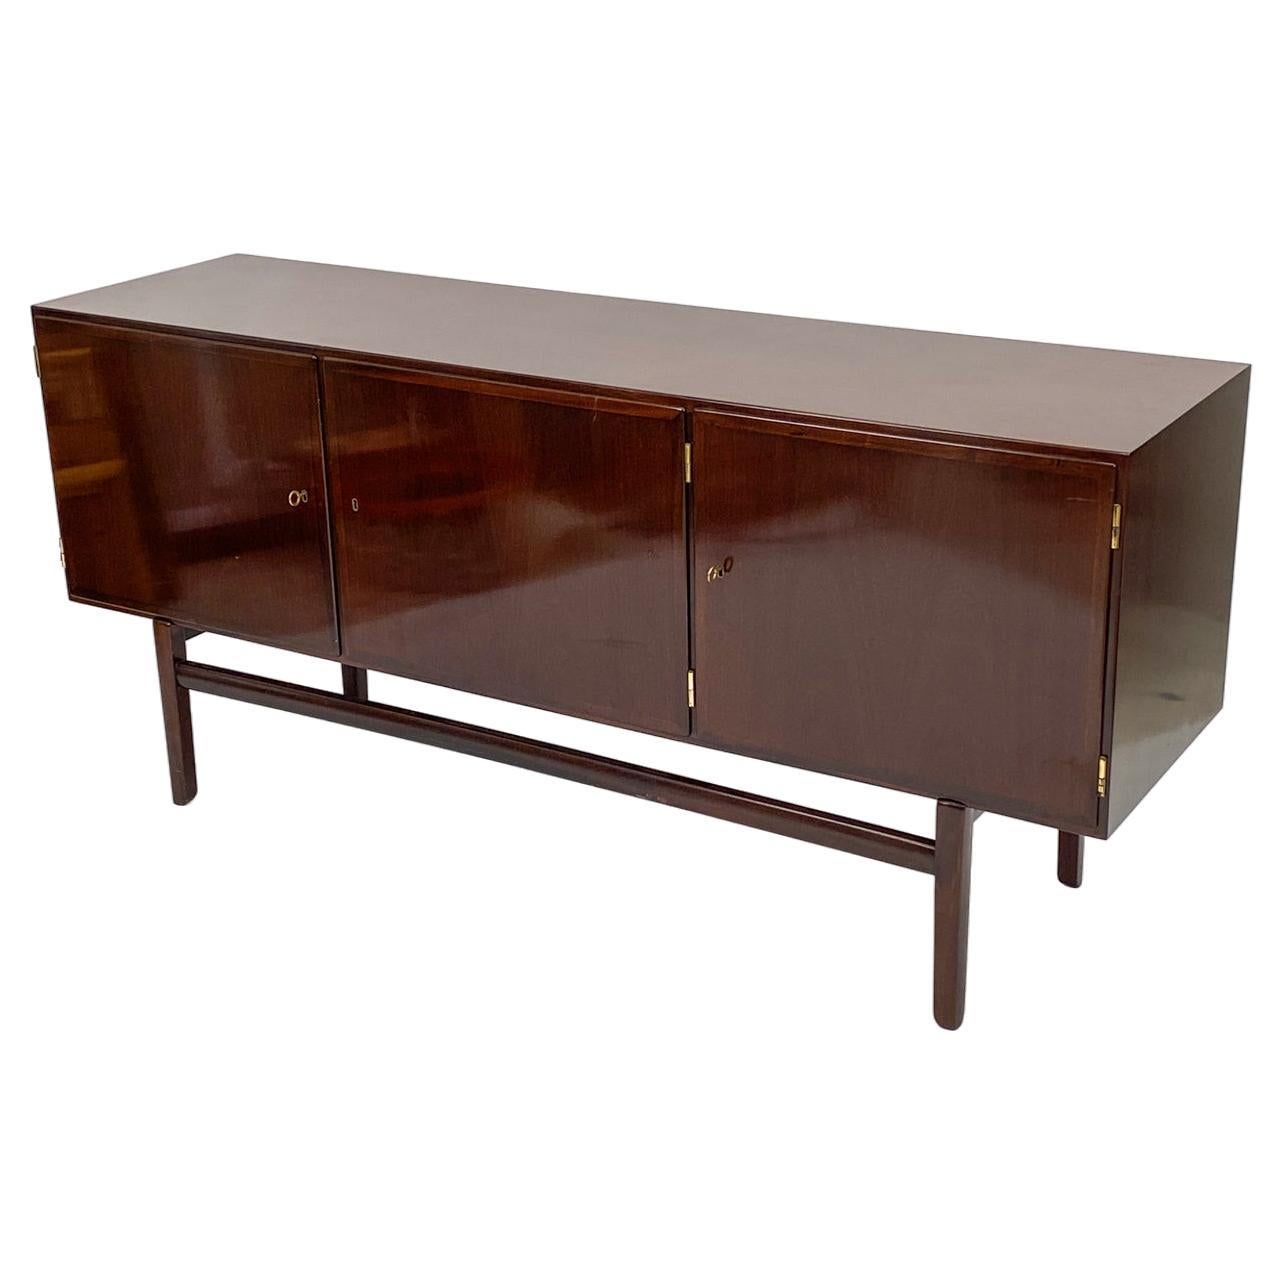 Ole Wanscher for Poul Jeppesen Rungstedlund Series Sideboard in Mahogany For Sale